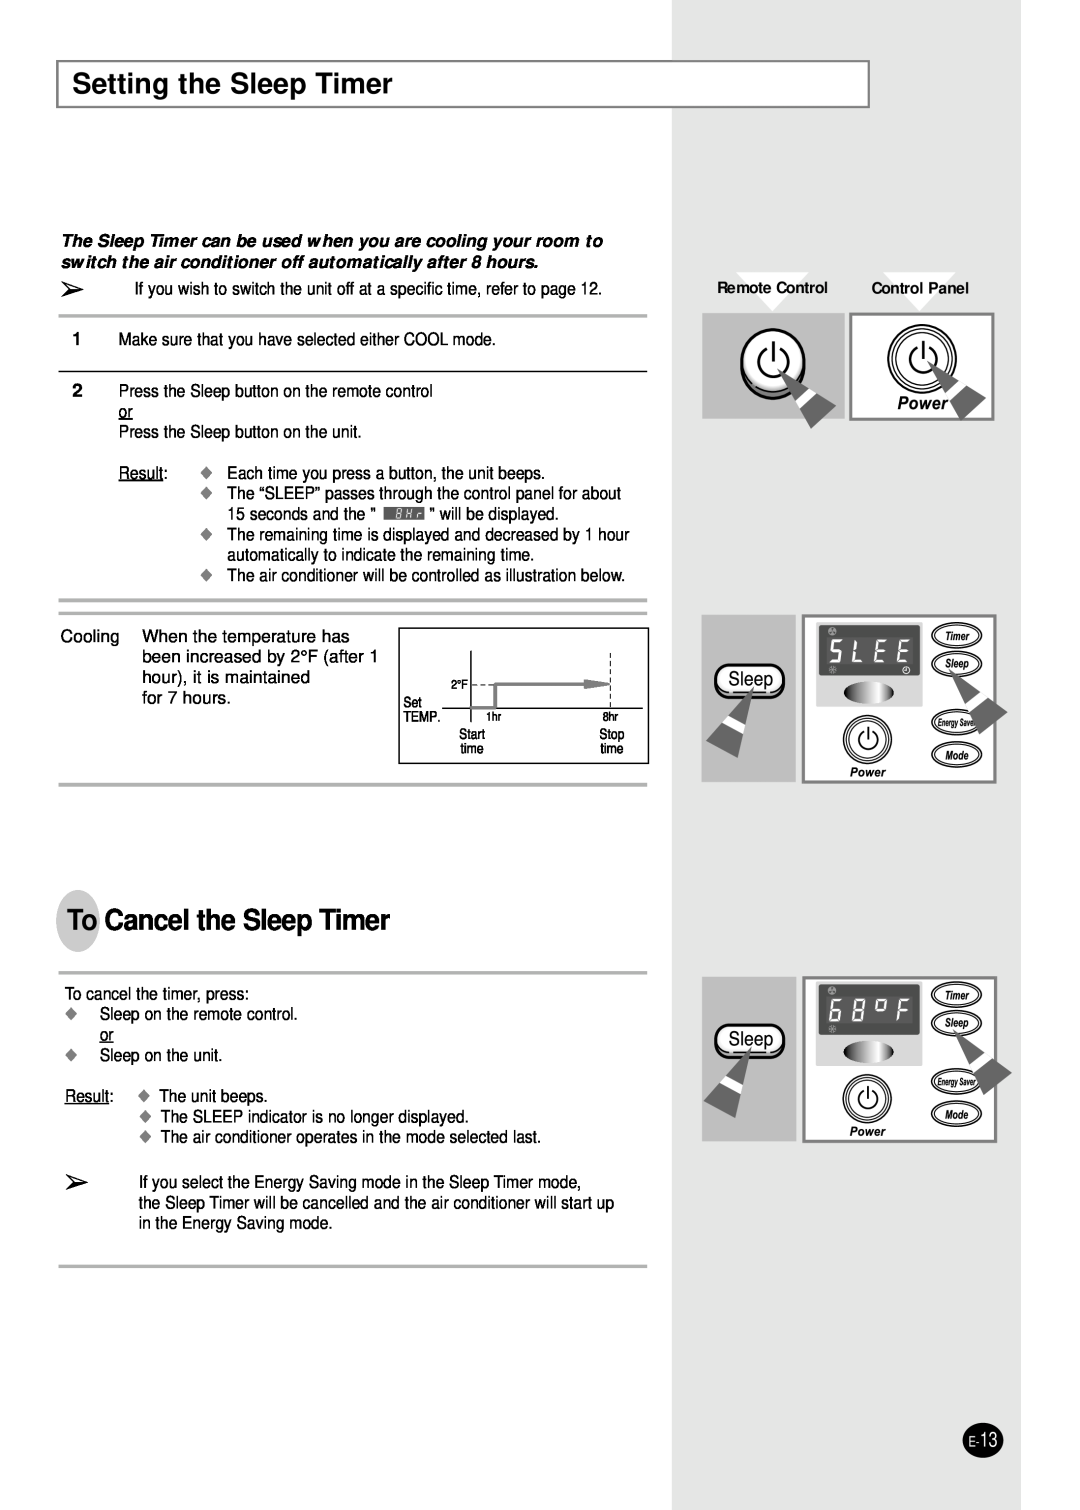 Samsung Model AW089AB manual Setting the Sleep Timer, To Cancel the Sleep Timer, Remote Control 